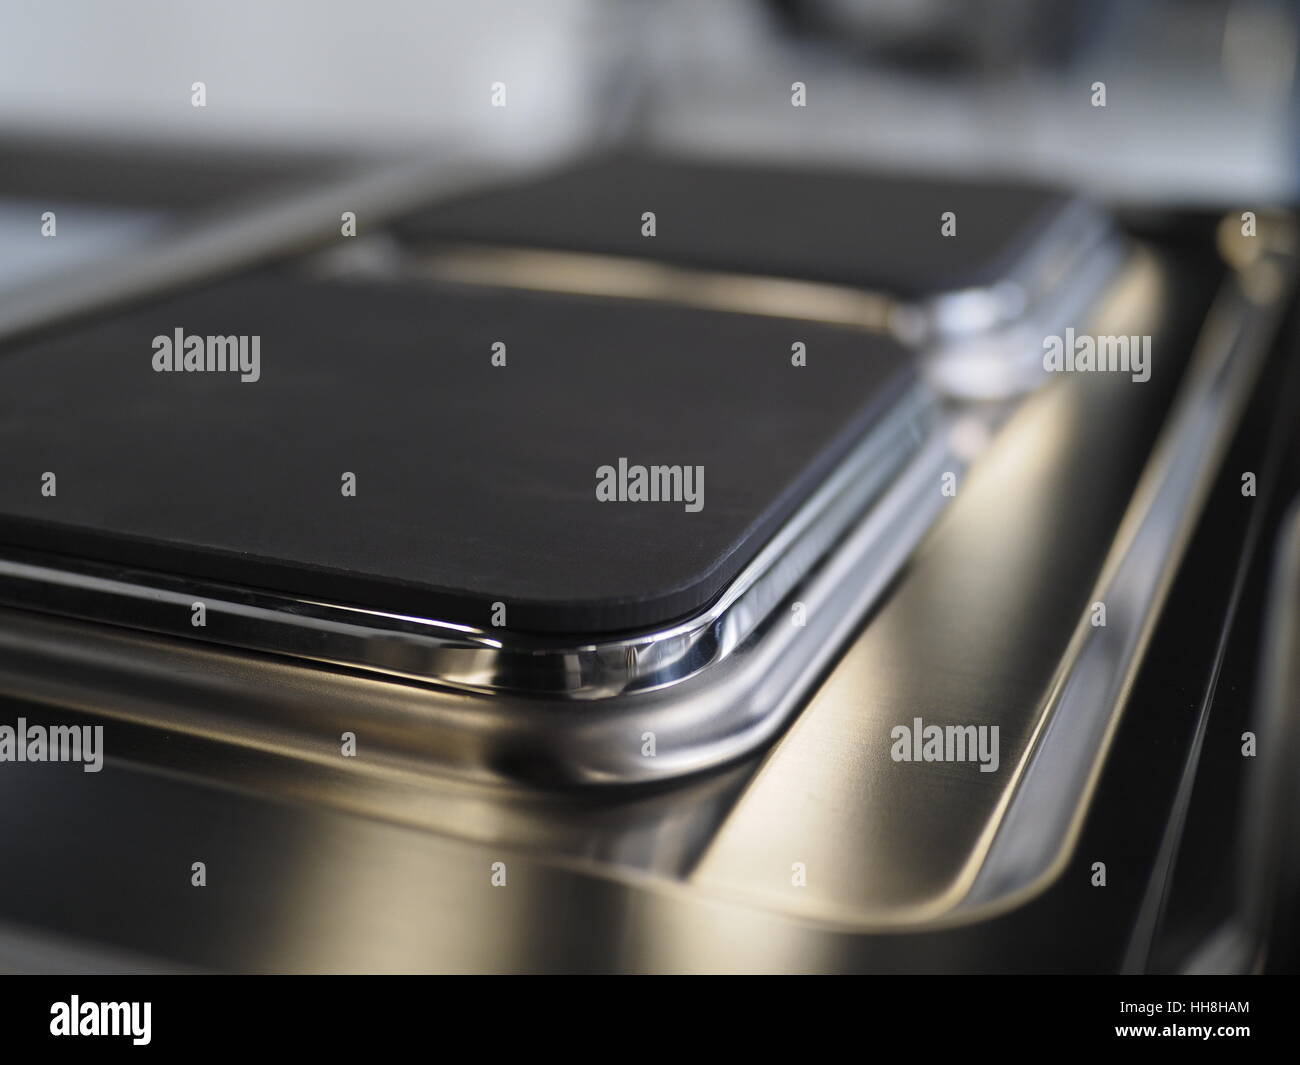 Professional kitchen appliances for industrial kitchens; electric range detail Stock Photo